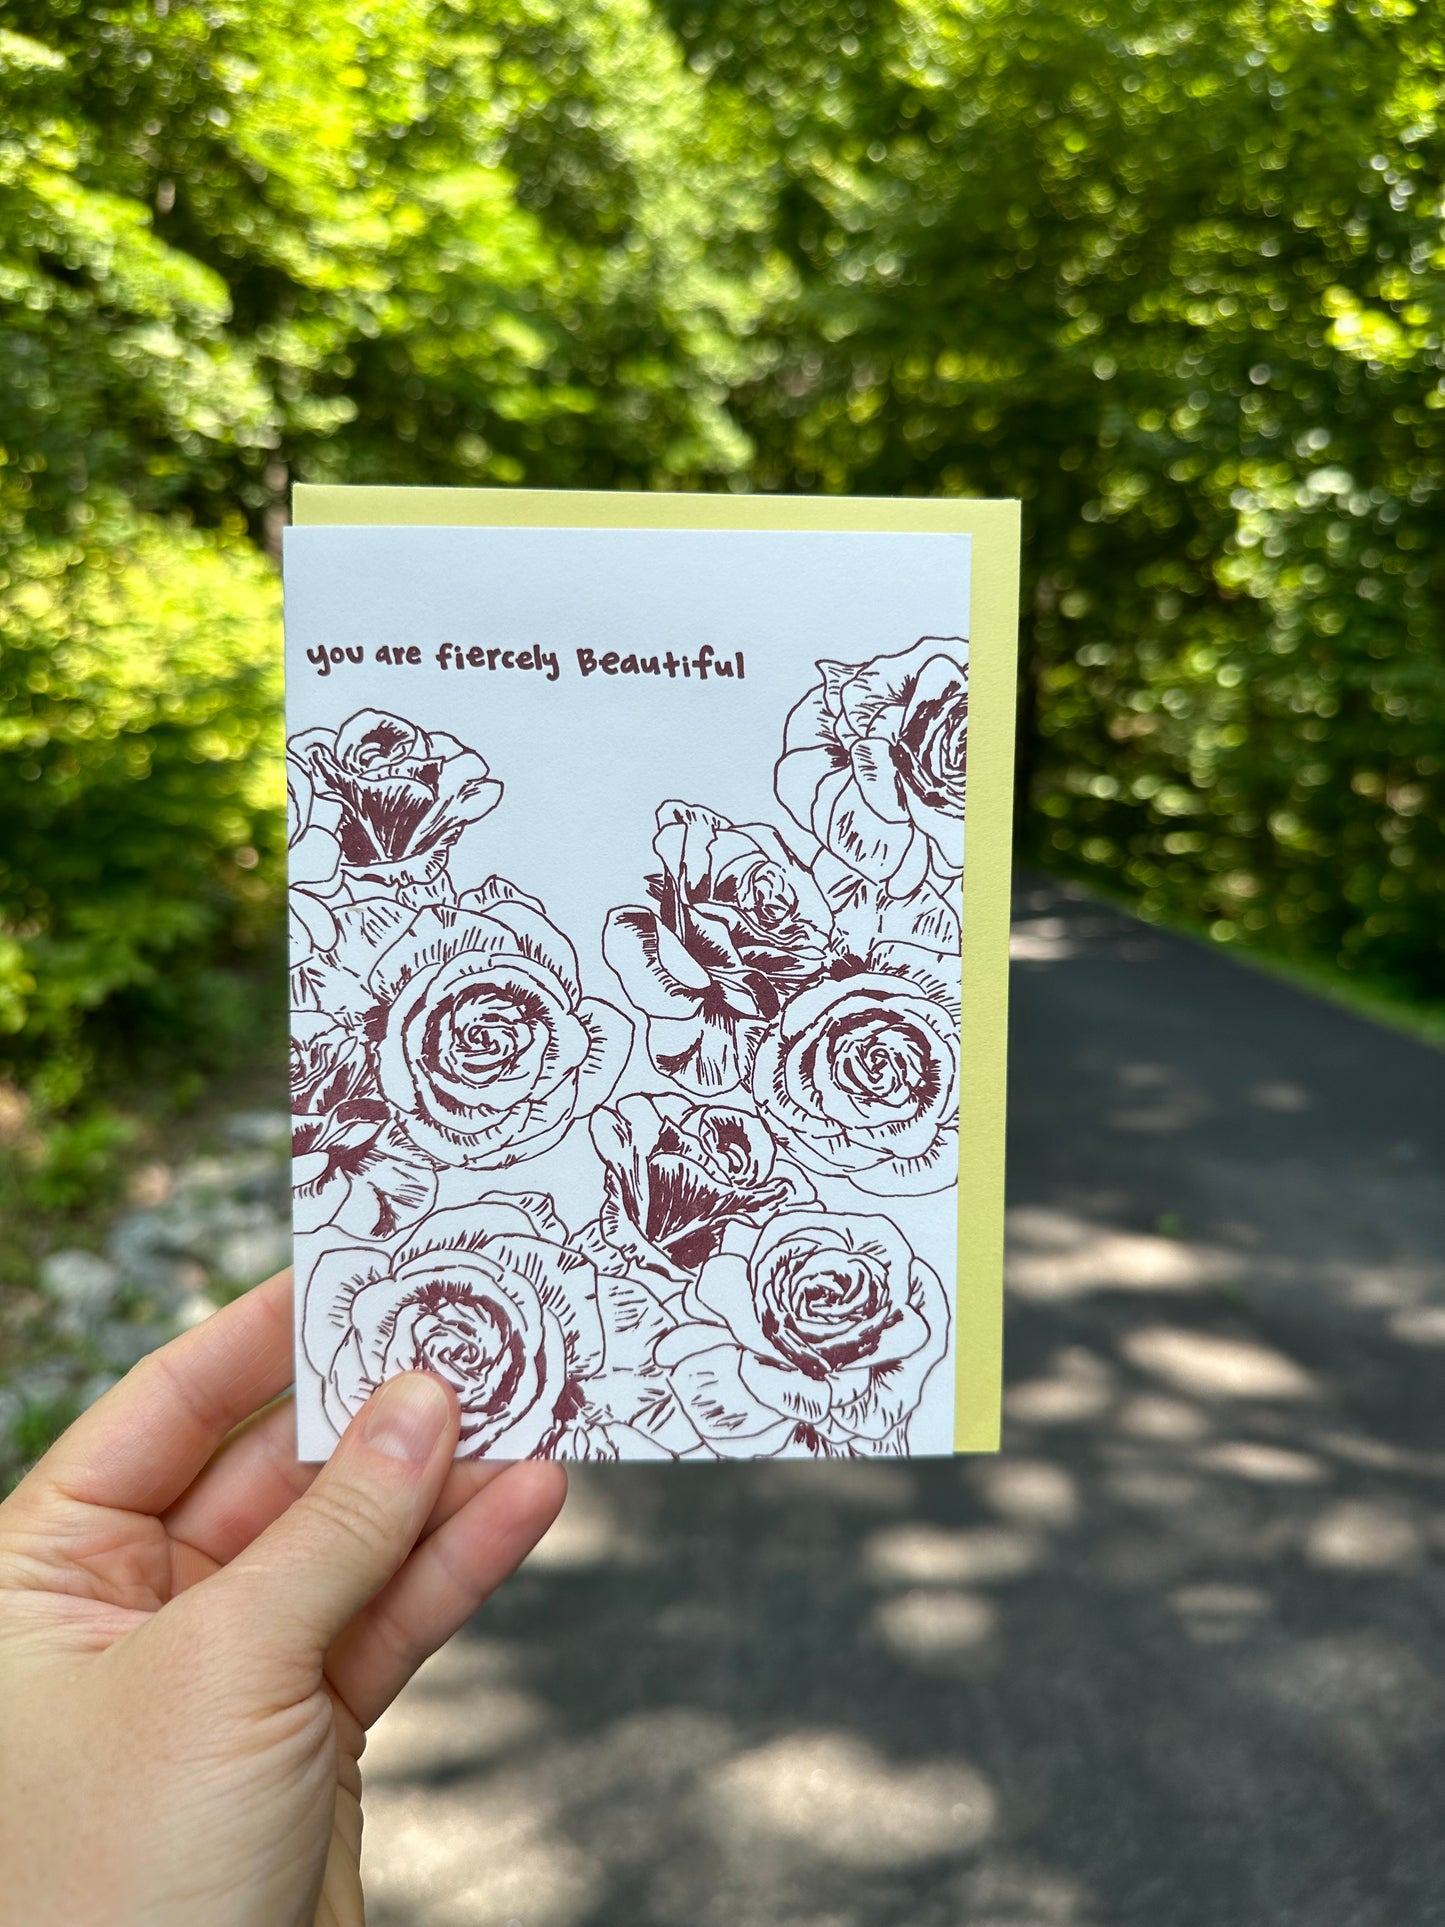 Letterpress greeting card featuring hand-drawn rose flowers printed in a rich, warm brown ink. Whimsical hand-drawn text saying "you are fiercely beautiful" is shown at the top of the card, in the same brown ink. The card is white, blank inside, and is paired with a soft yellow envelope. Card is shown outside in front of a country rode on a sunny summer day. 